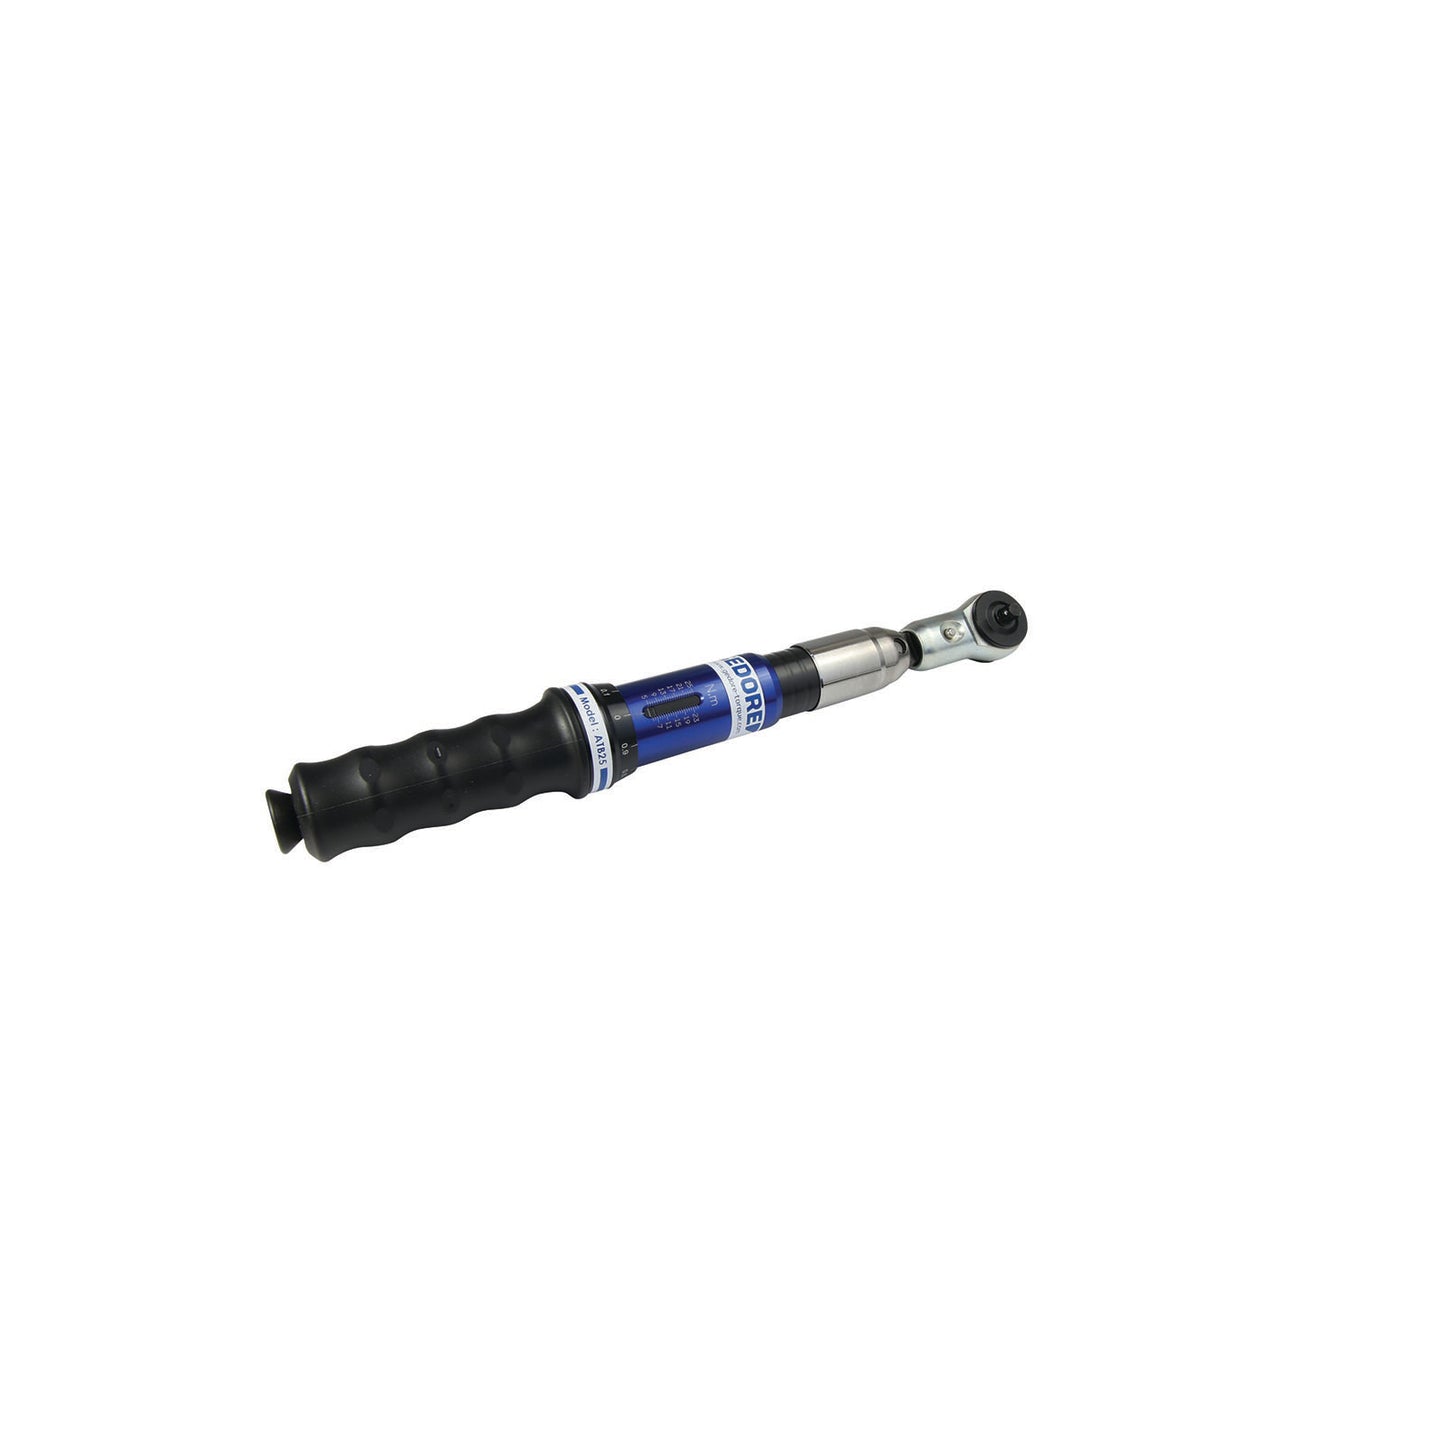 GEDORE ATB 10 LBF.IN - Buckling Torque Wrench LBF.IN Z 8 050555 (2293412)